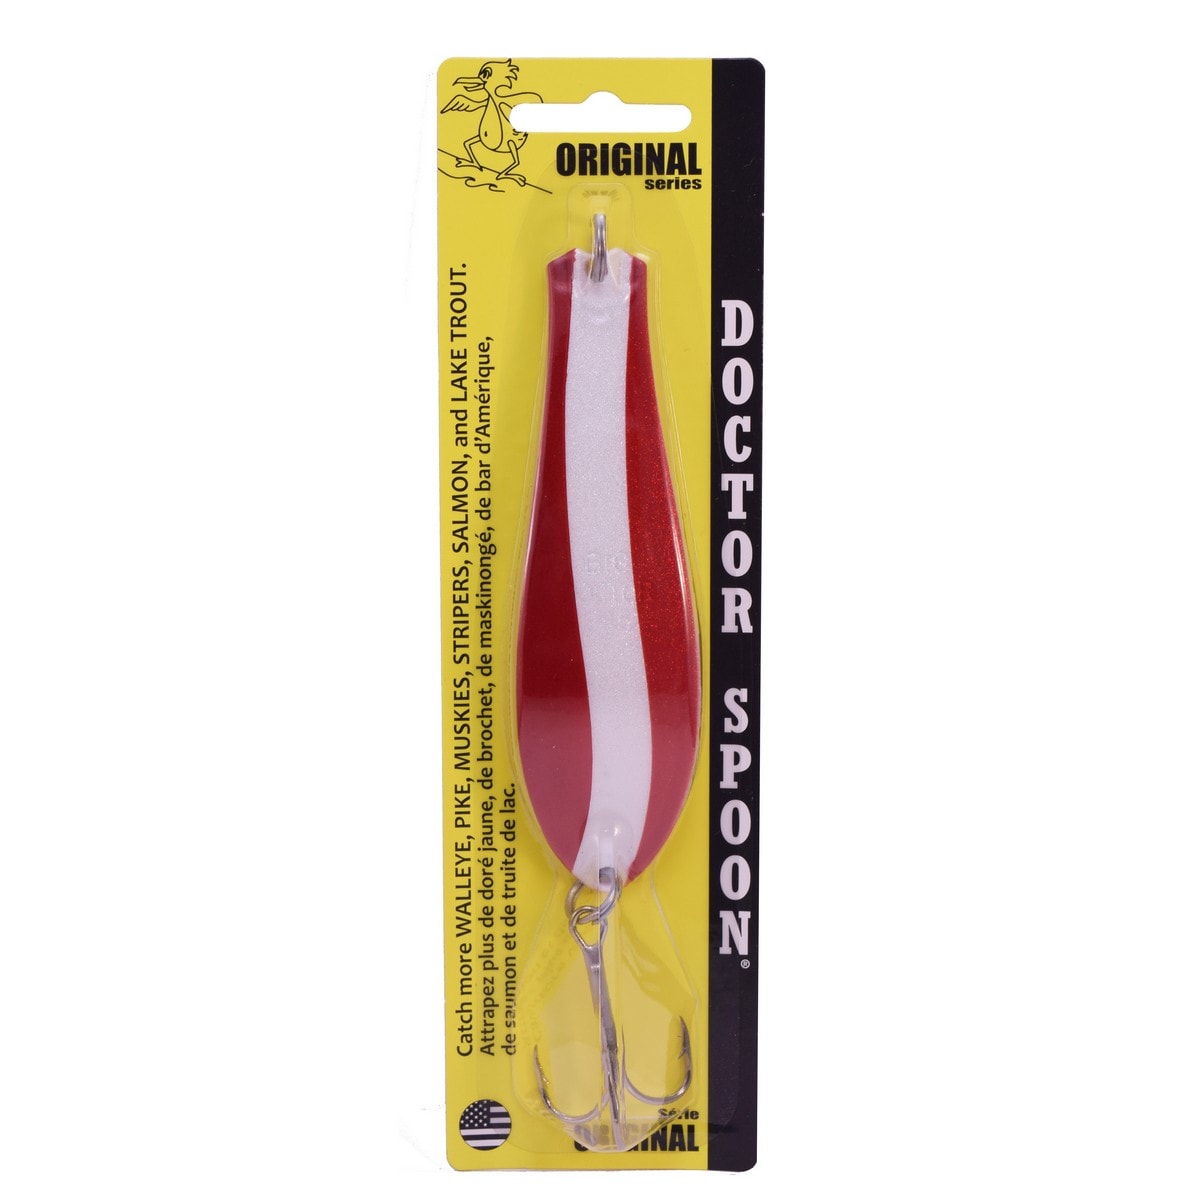 Doctor Spoon in (35) Red / White Swirl - Yellow Bird Fishing Products